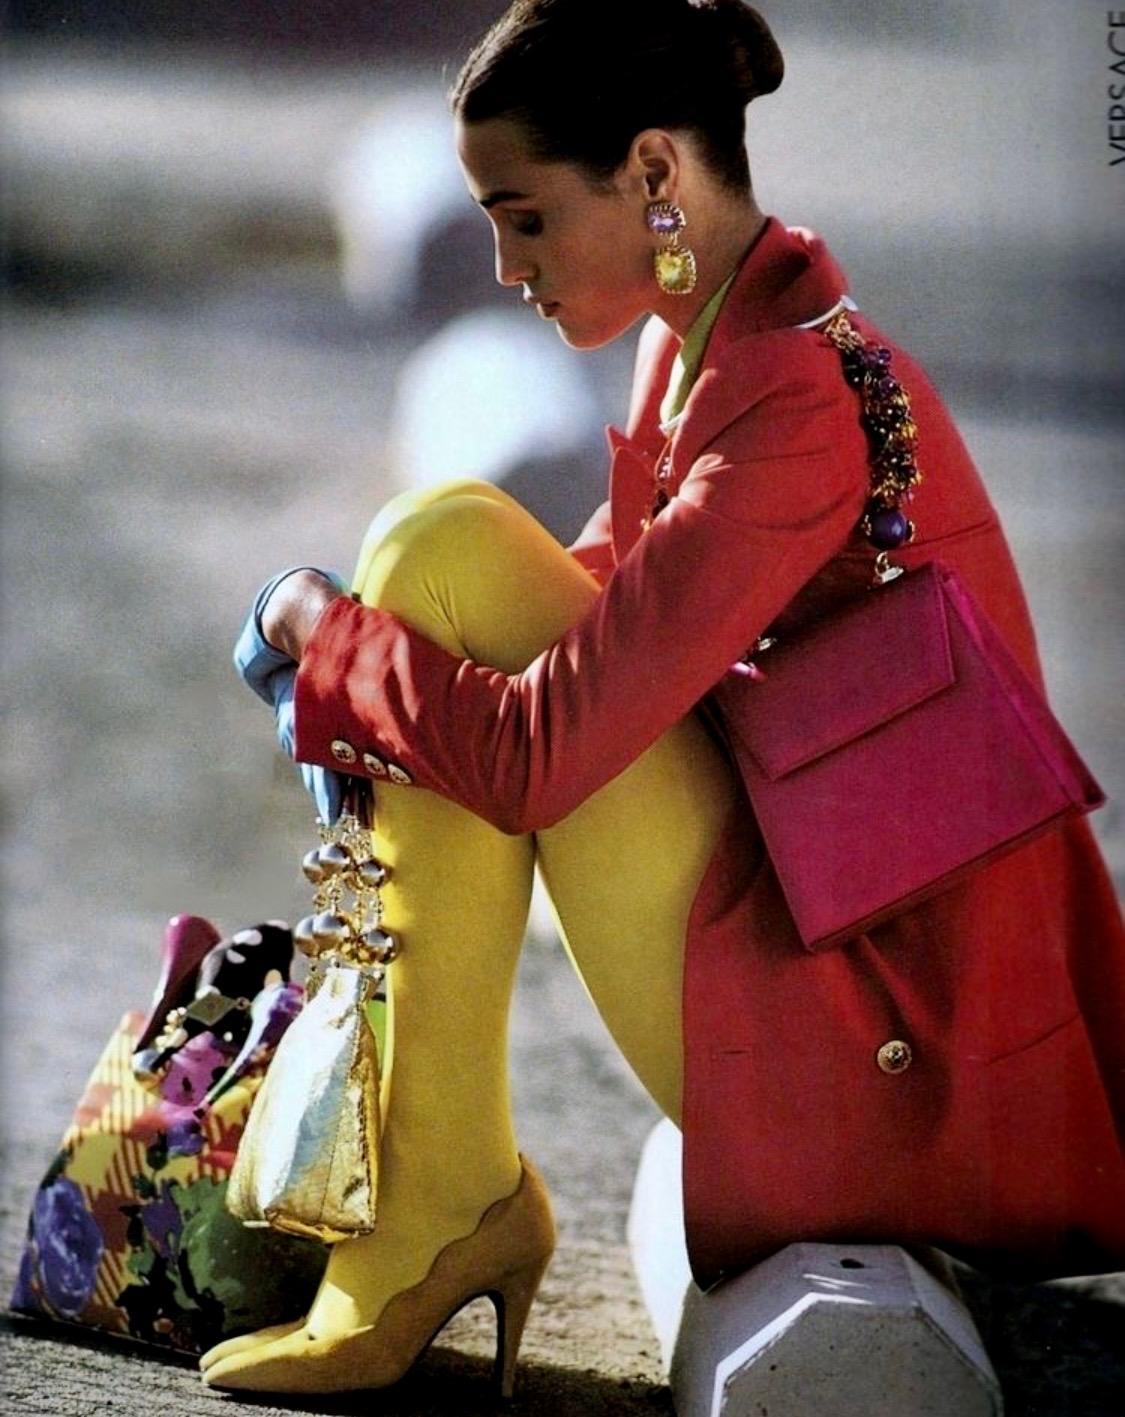 Presenting a Fuschia silk satin Gianni Versace top handle bag, designed by Gianni Versace. From the Spring/Summer 1991 collection, a version of this bag was highlighted in an editorial shoot of the April 1991 issue of Elle Sweden, photographed by